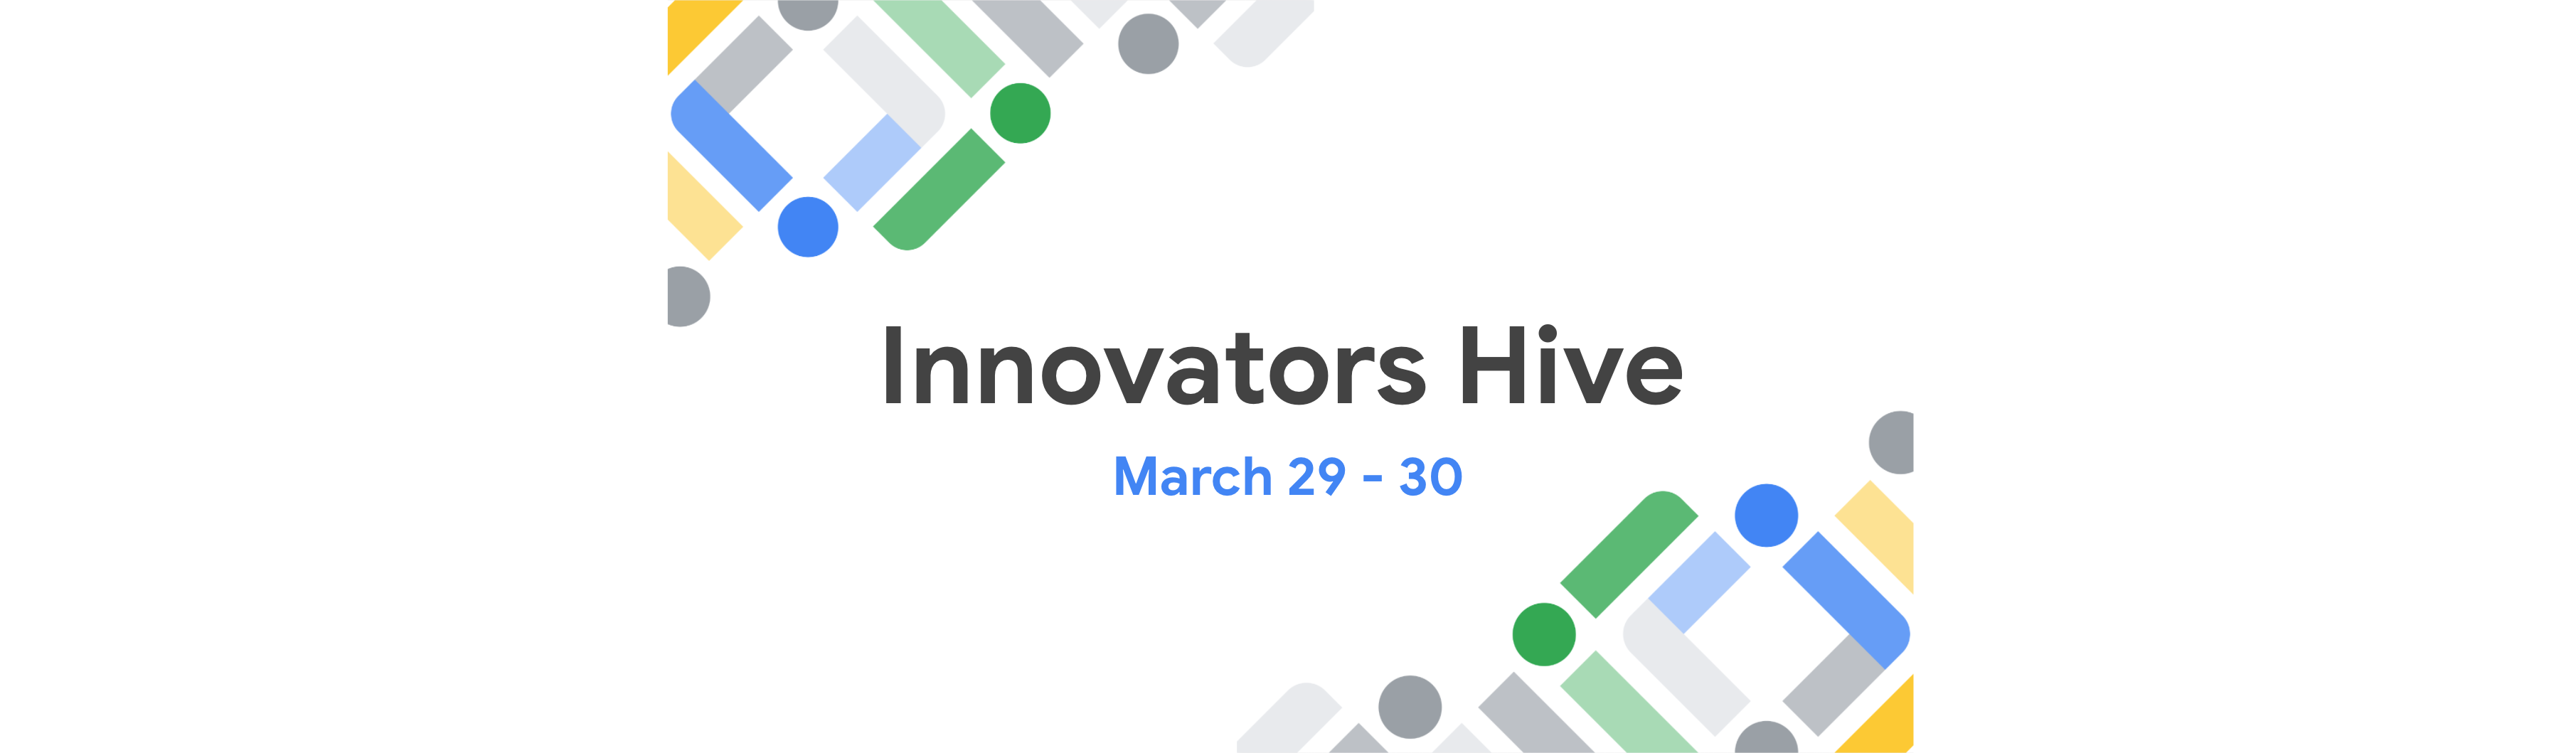 innovators-hive-event-image.png